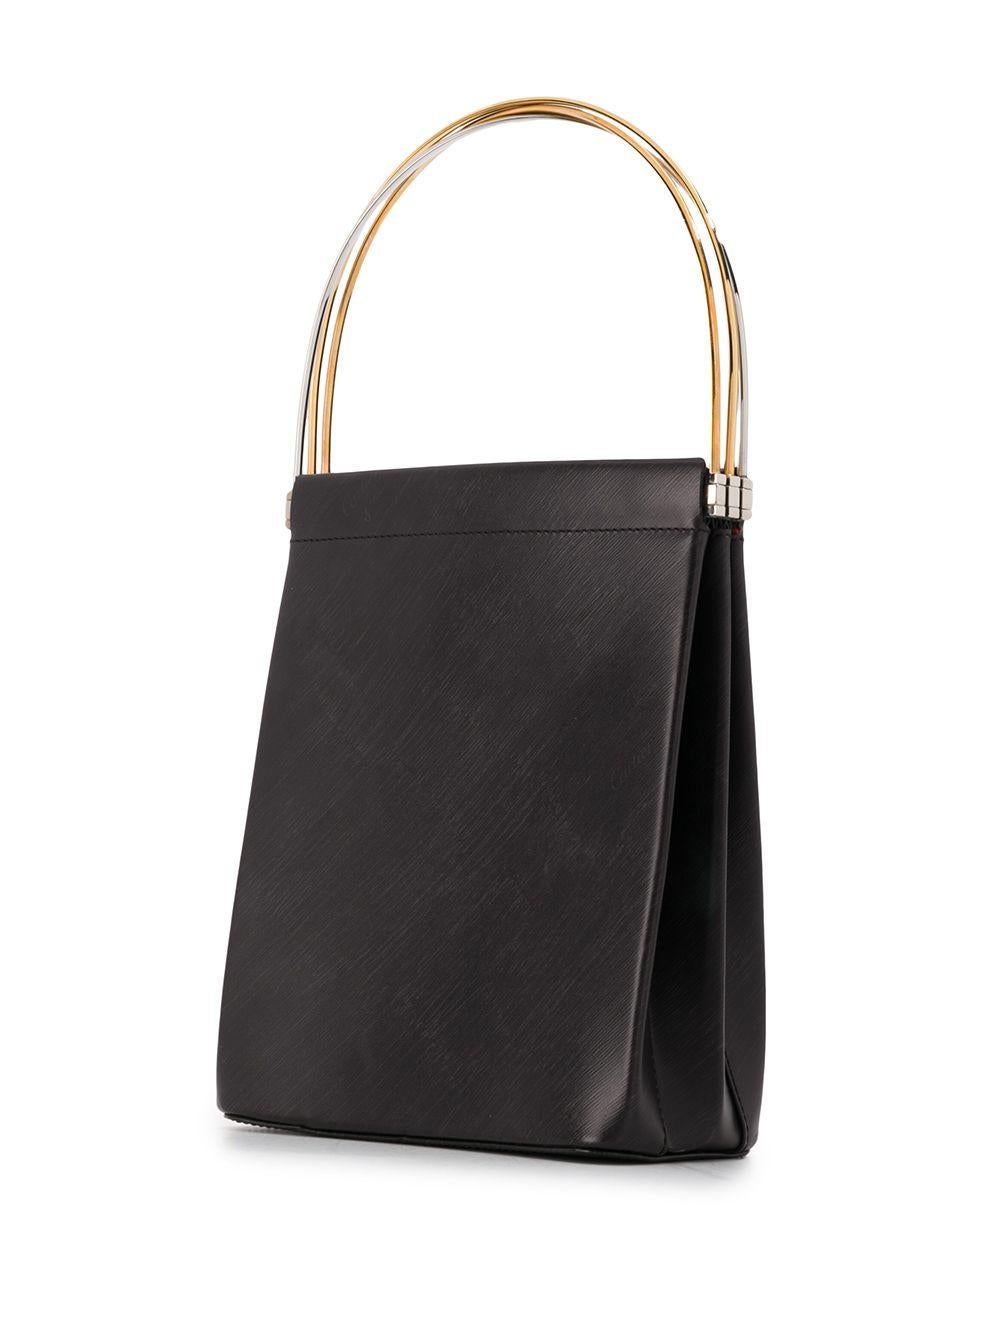 Crafted in France from pure black leather, this classic Trinity cage bag is a true work of art by Cartier, featuring a slim silhouette, a discrete logo screen running diagonally throughout and three iconic round metal top handles in an assortment of